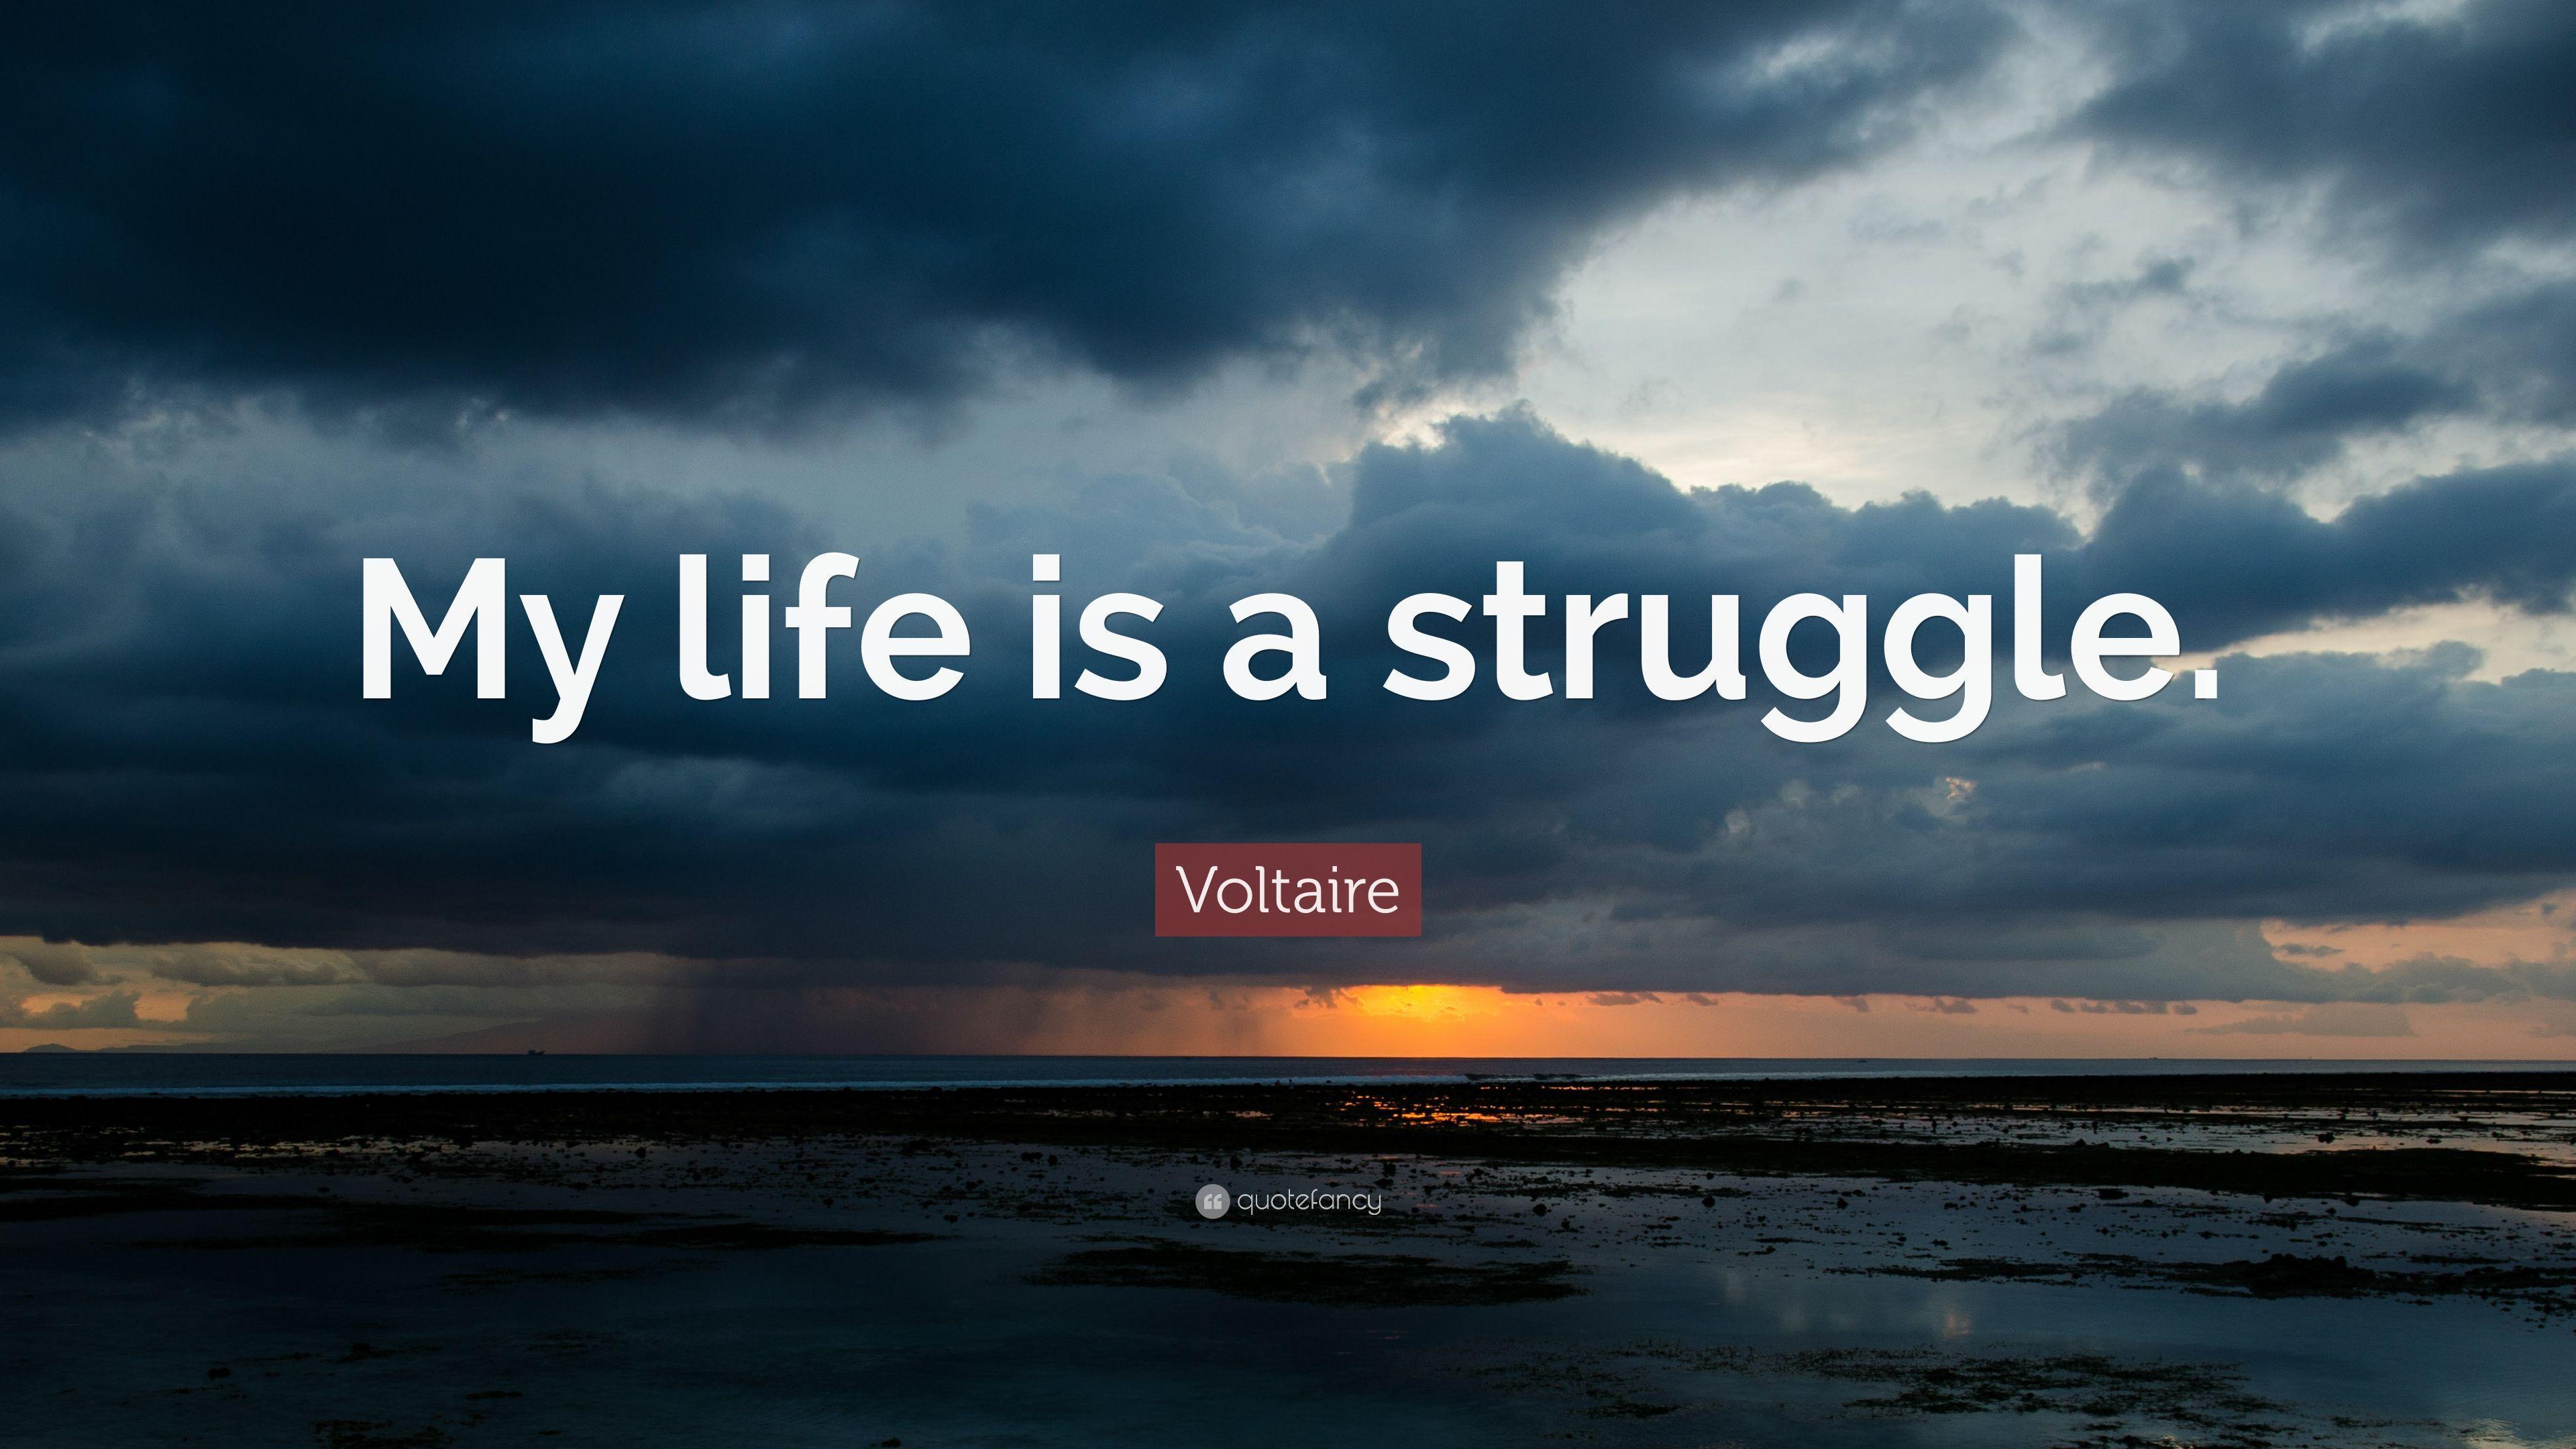 Voltaire Quote: “My life is a struggle.” (10 wallpaper)